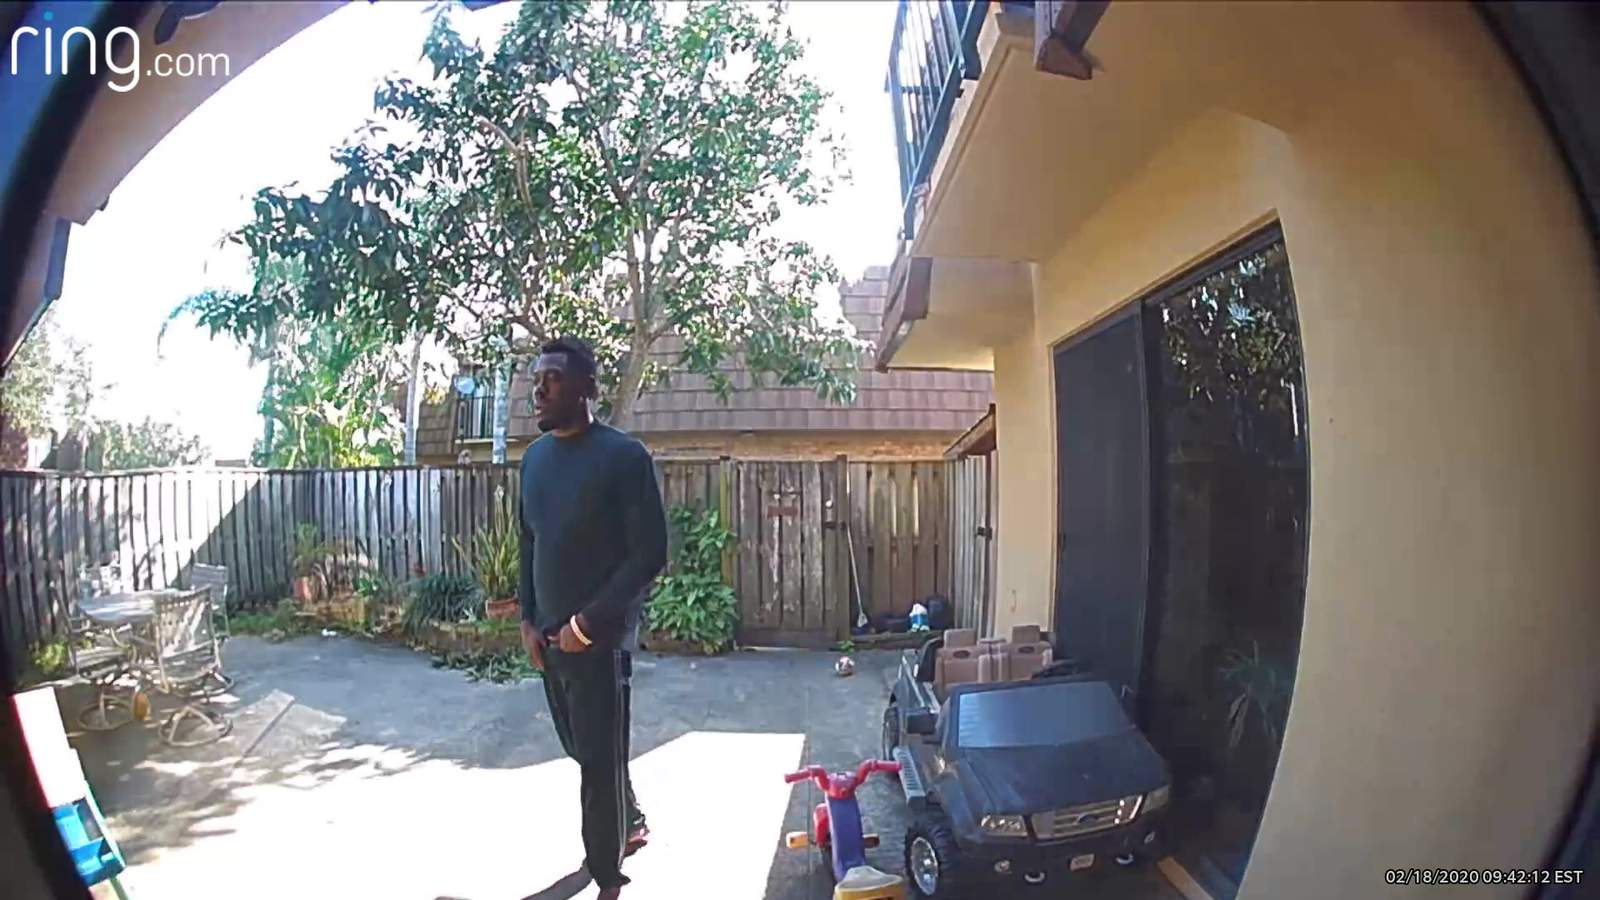 Orlando police ID man killed by officers, release images of attempted burglary